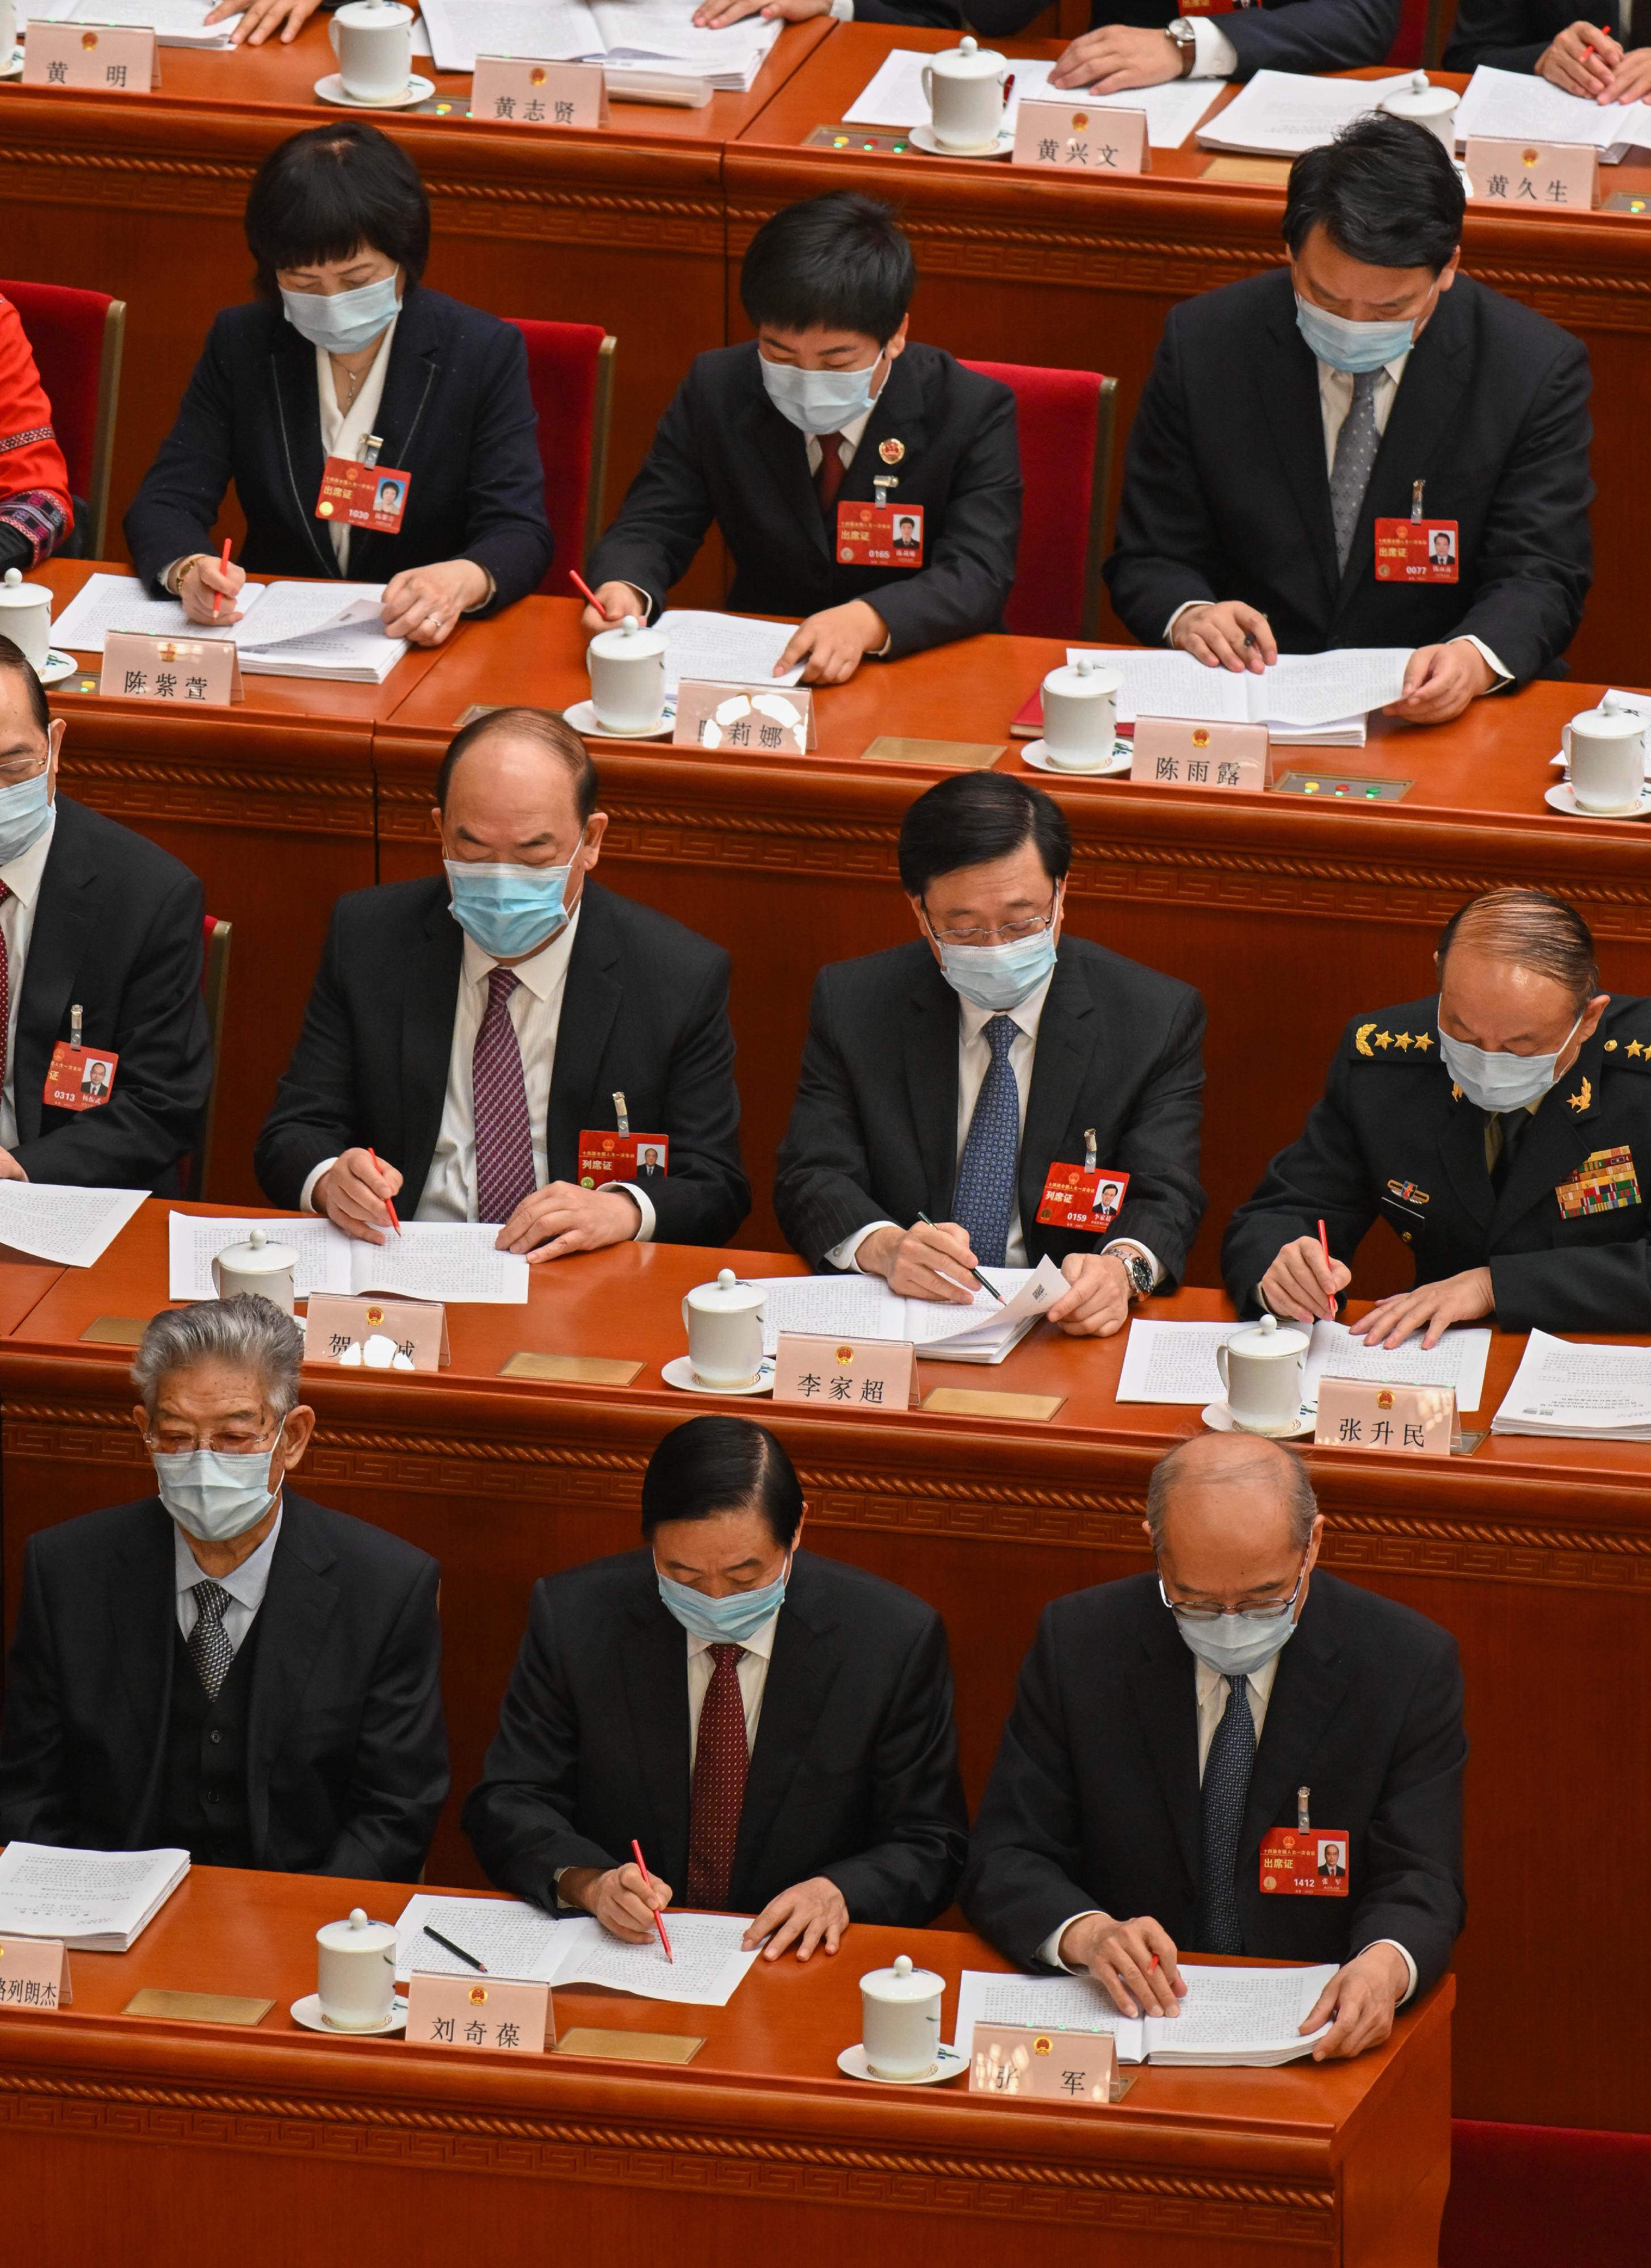 The Chief Executive, Mr John Lee (second row, second right), attends the opening ceremony of the first session of the 14th National People's Congress in Beijing this morning (March 5).